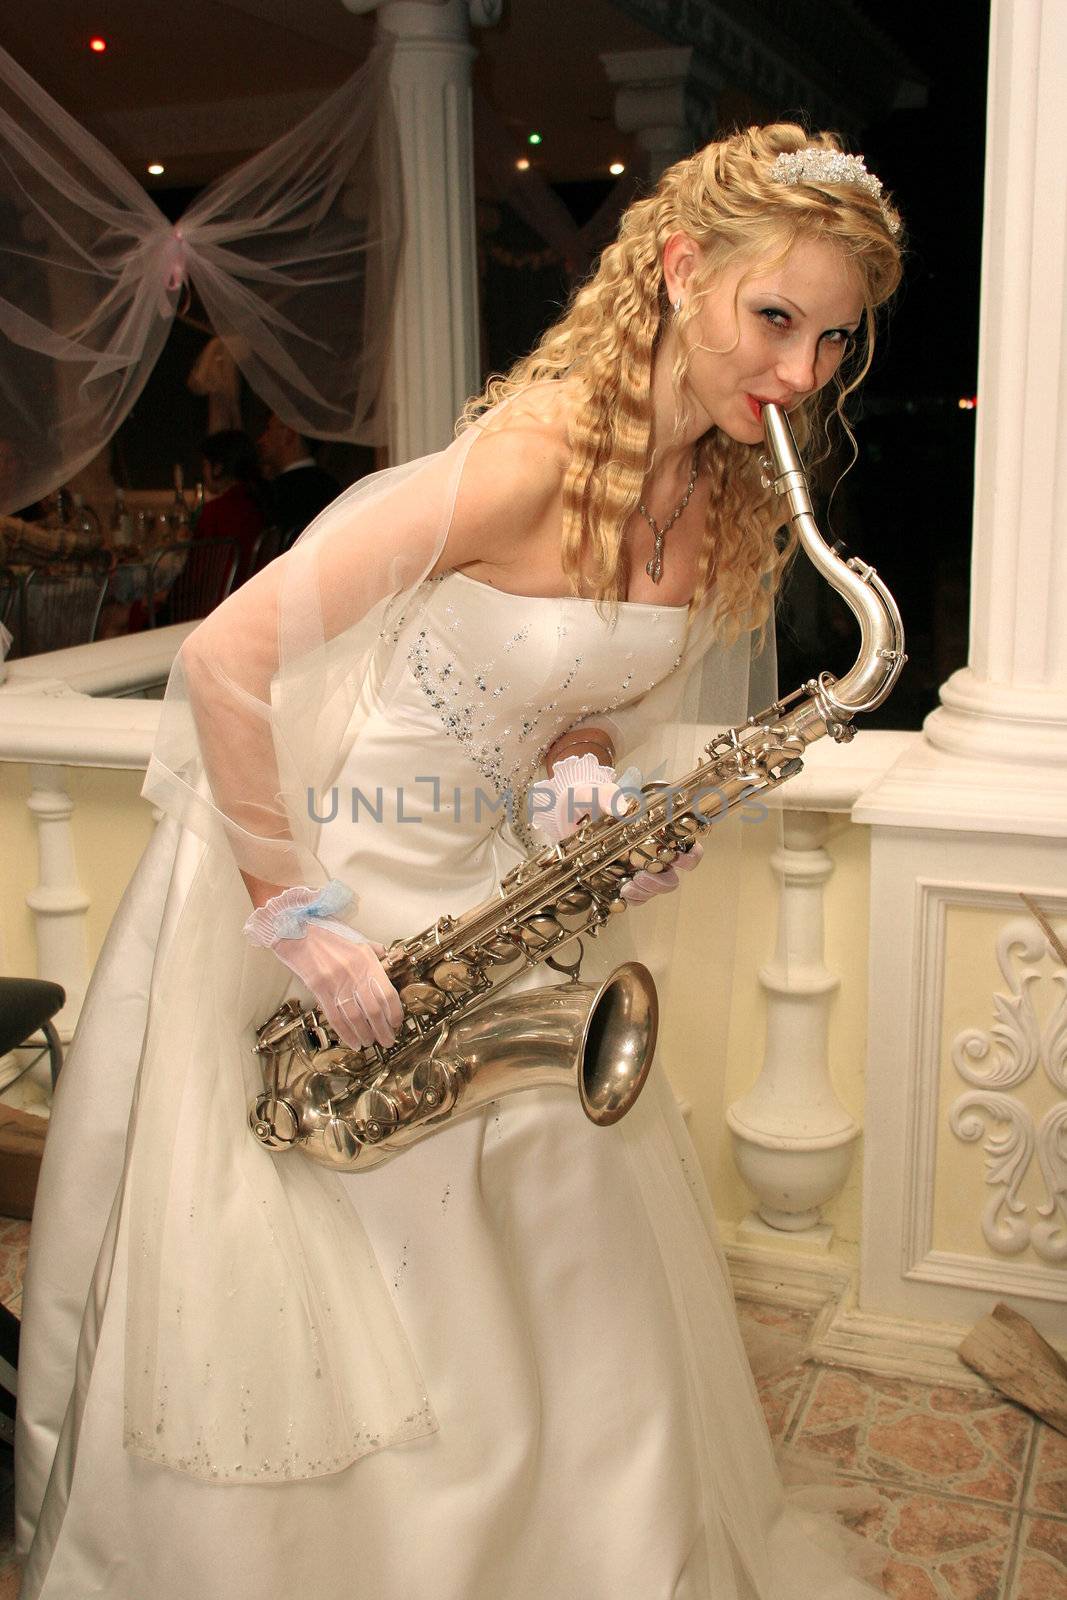 Bride plays the saxophone by NickNick